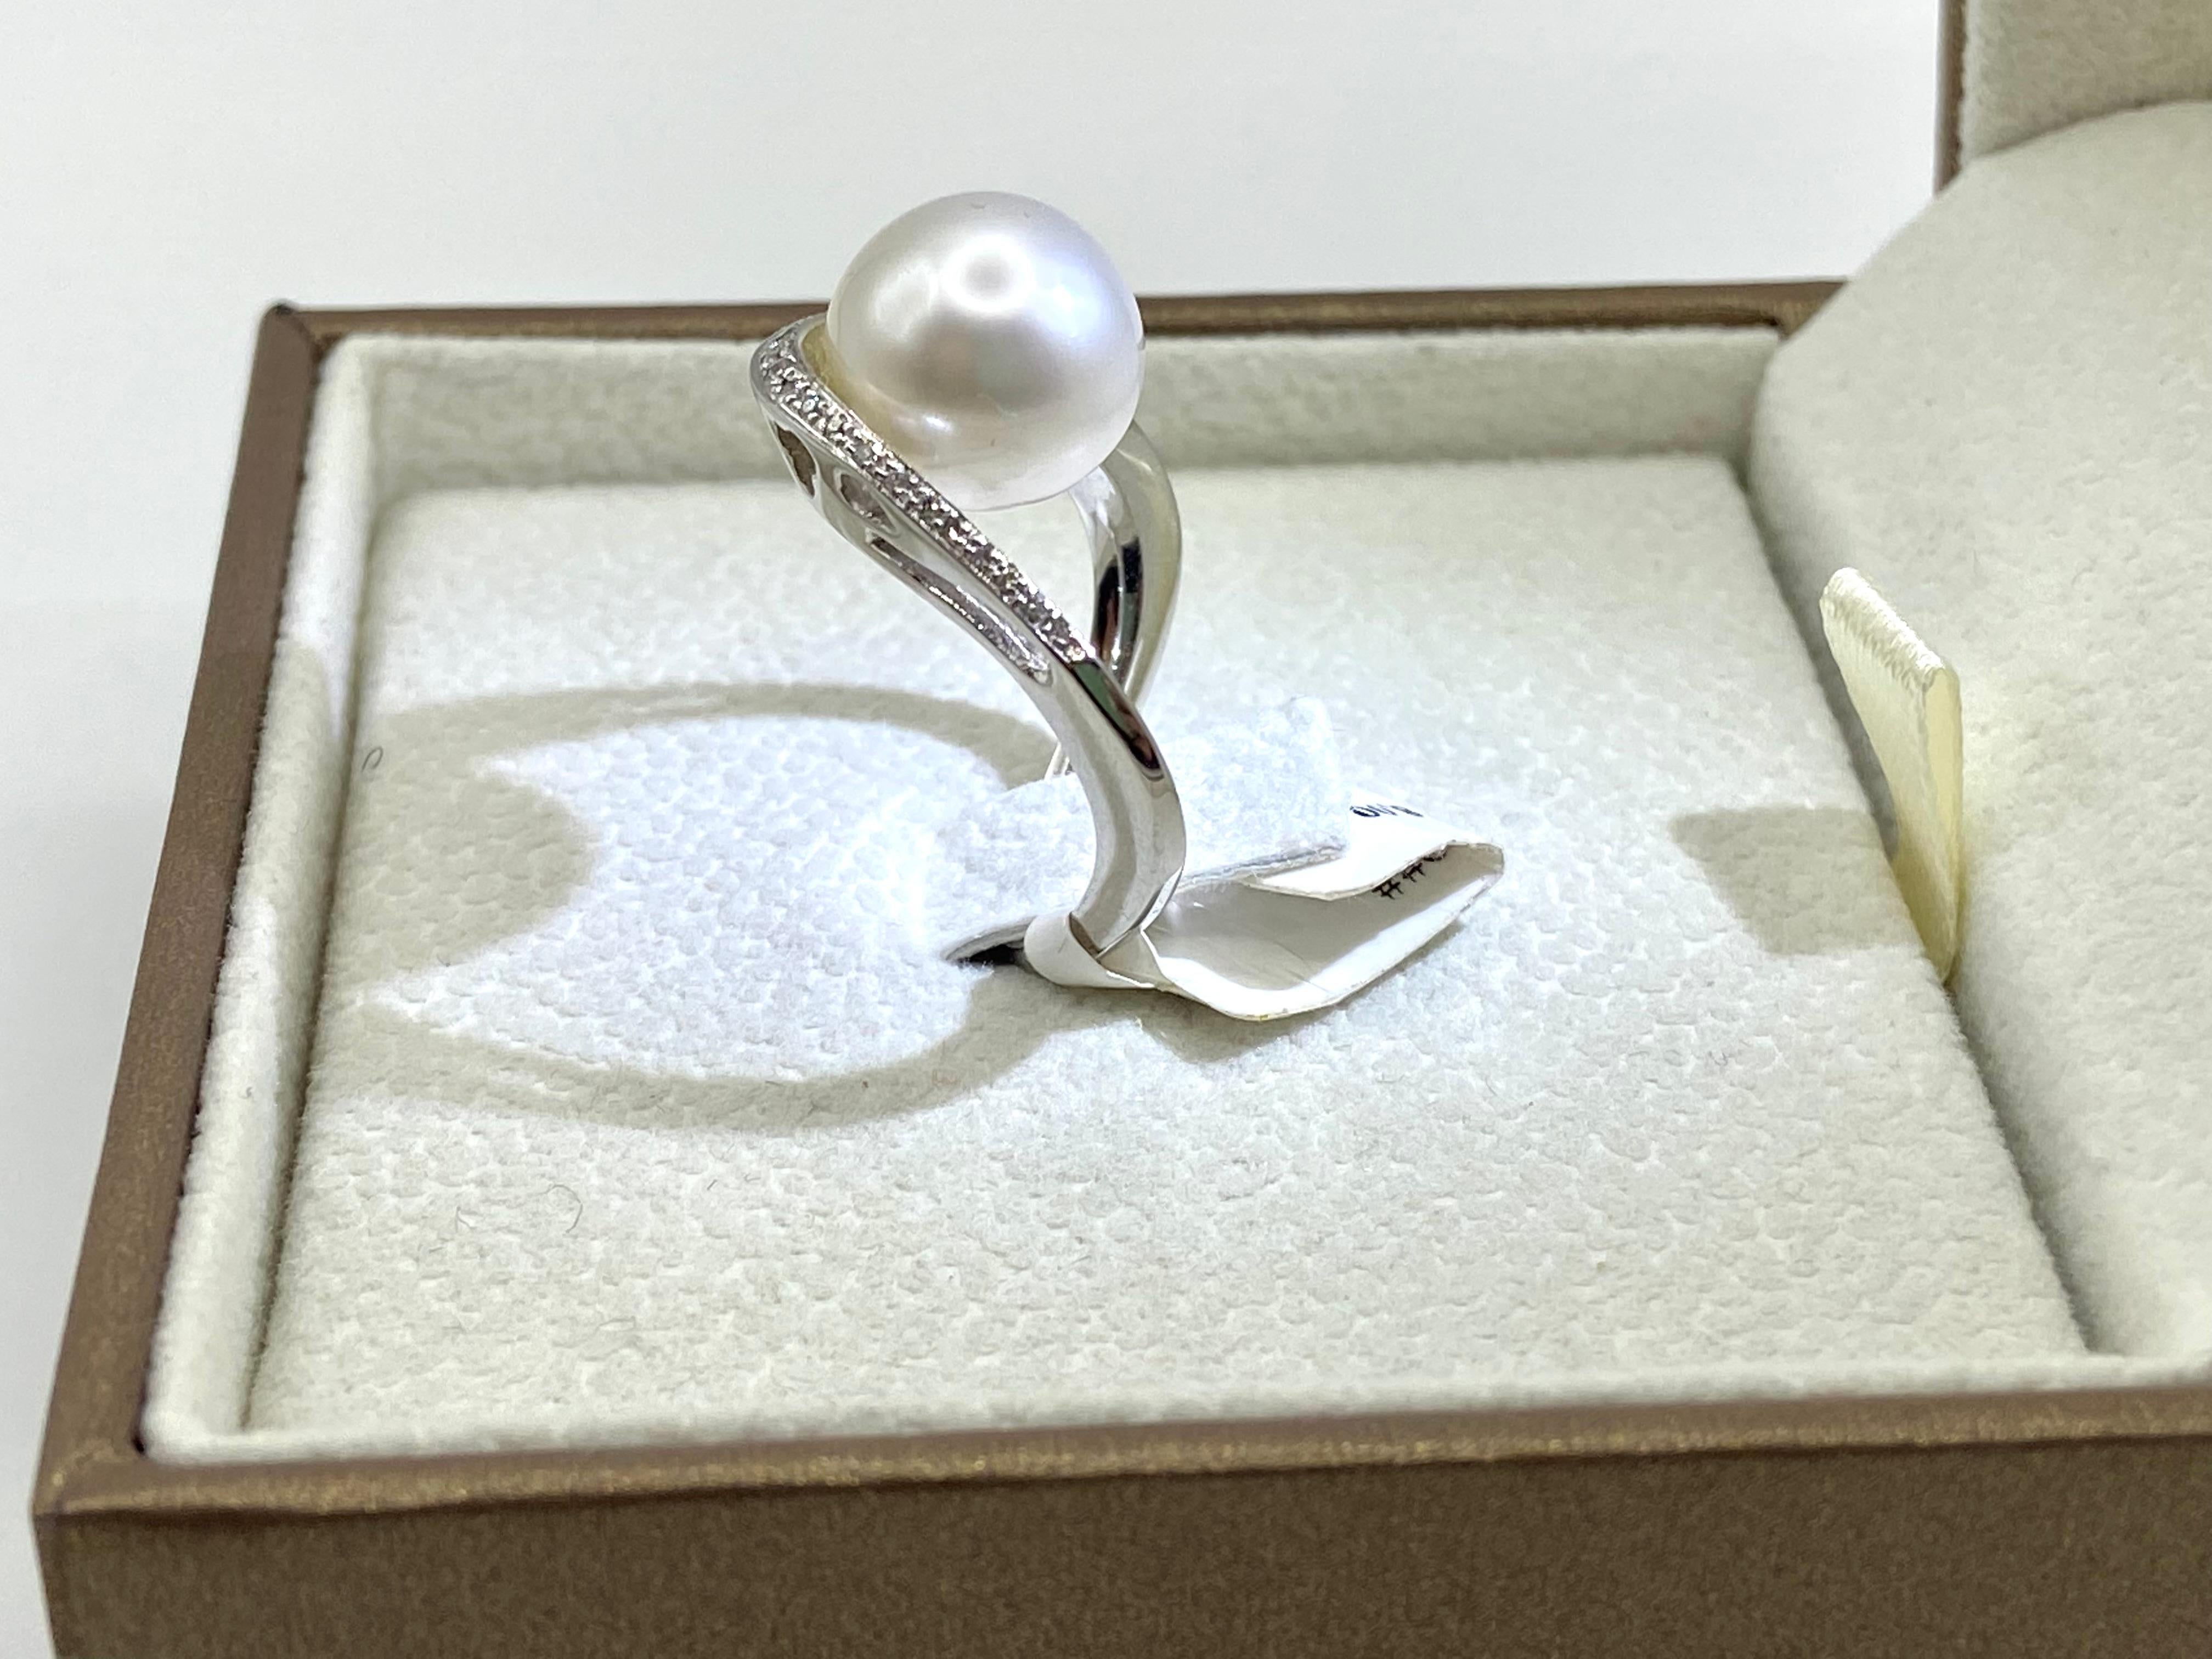 18 kt white gold ring, cultured pearl mm 10, brilliant cut diamonds
Handmade. The Australian cultured pearl, called , ct 8 , measures 11 mm.  18 kt gold. Brilliant cut diamonds set, color G, vs, 0.09 ct; It weighs 5 grams, size 11 .Design ring, sold